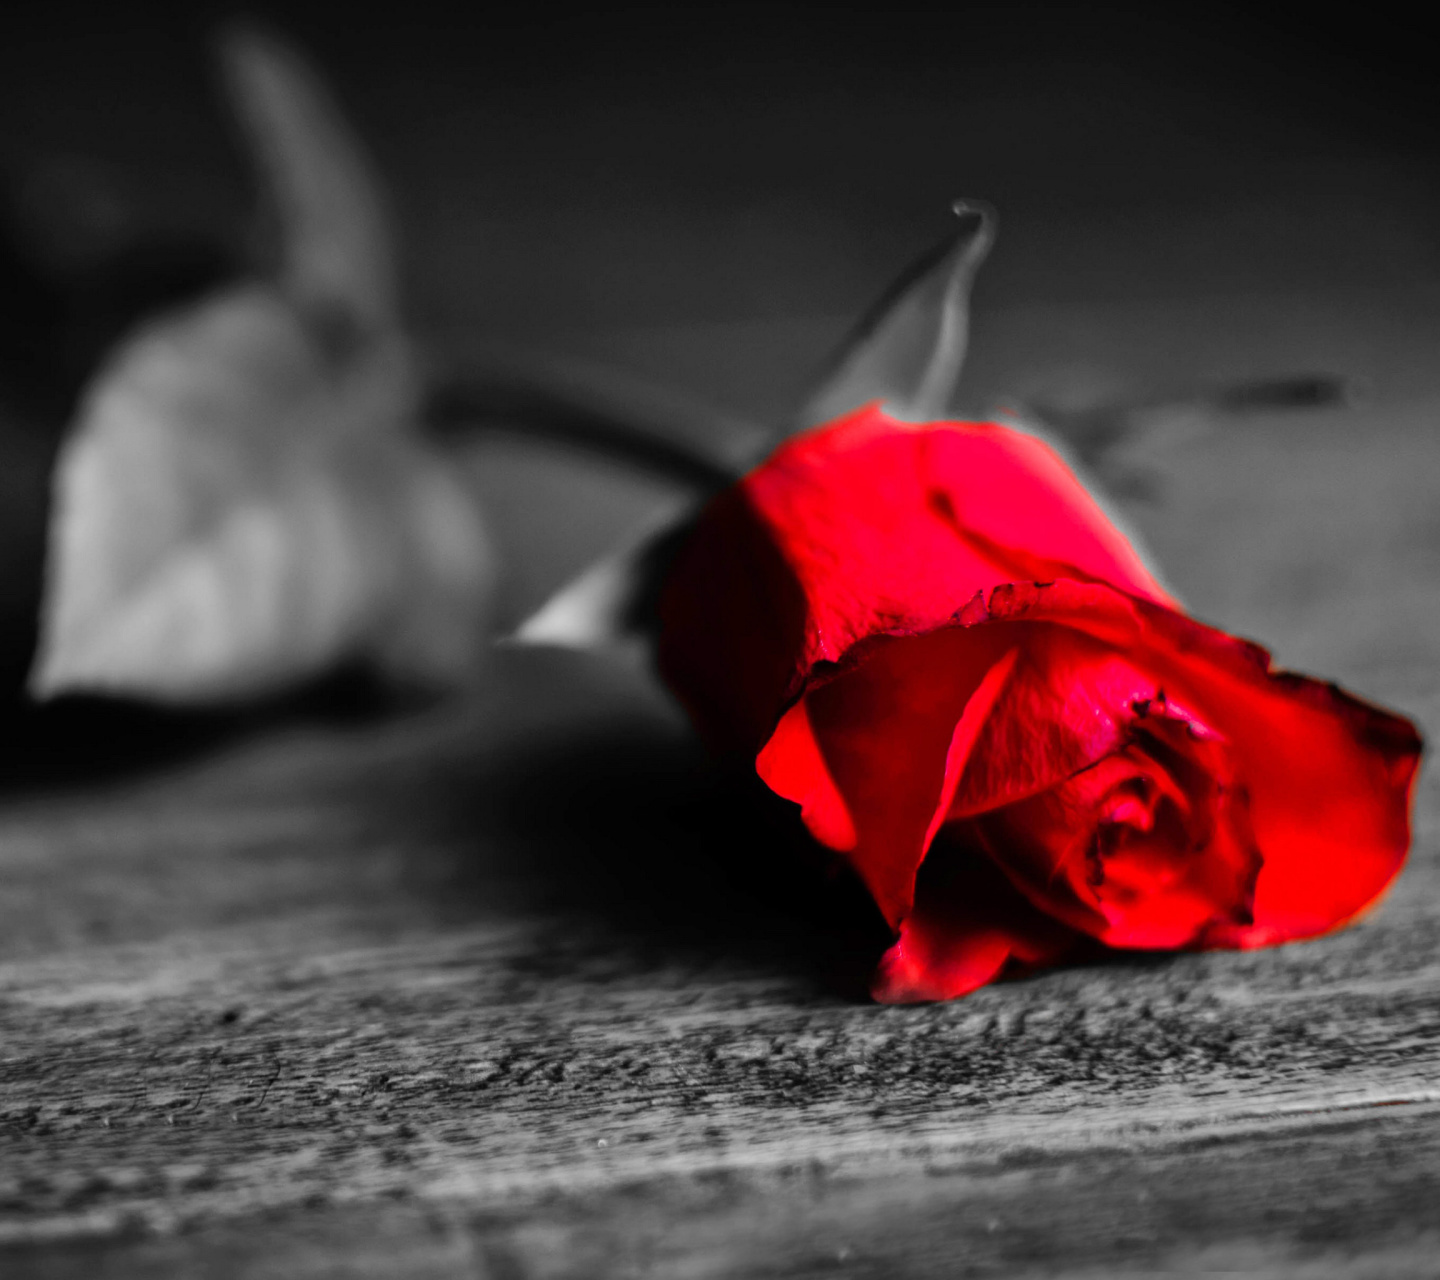 Red Rose On Wooden Surface wallpaper 1440x1280